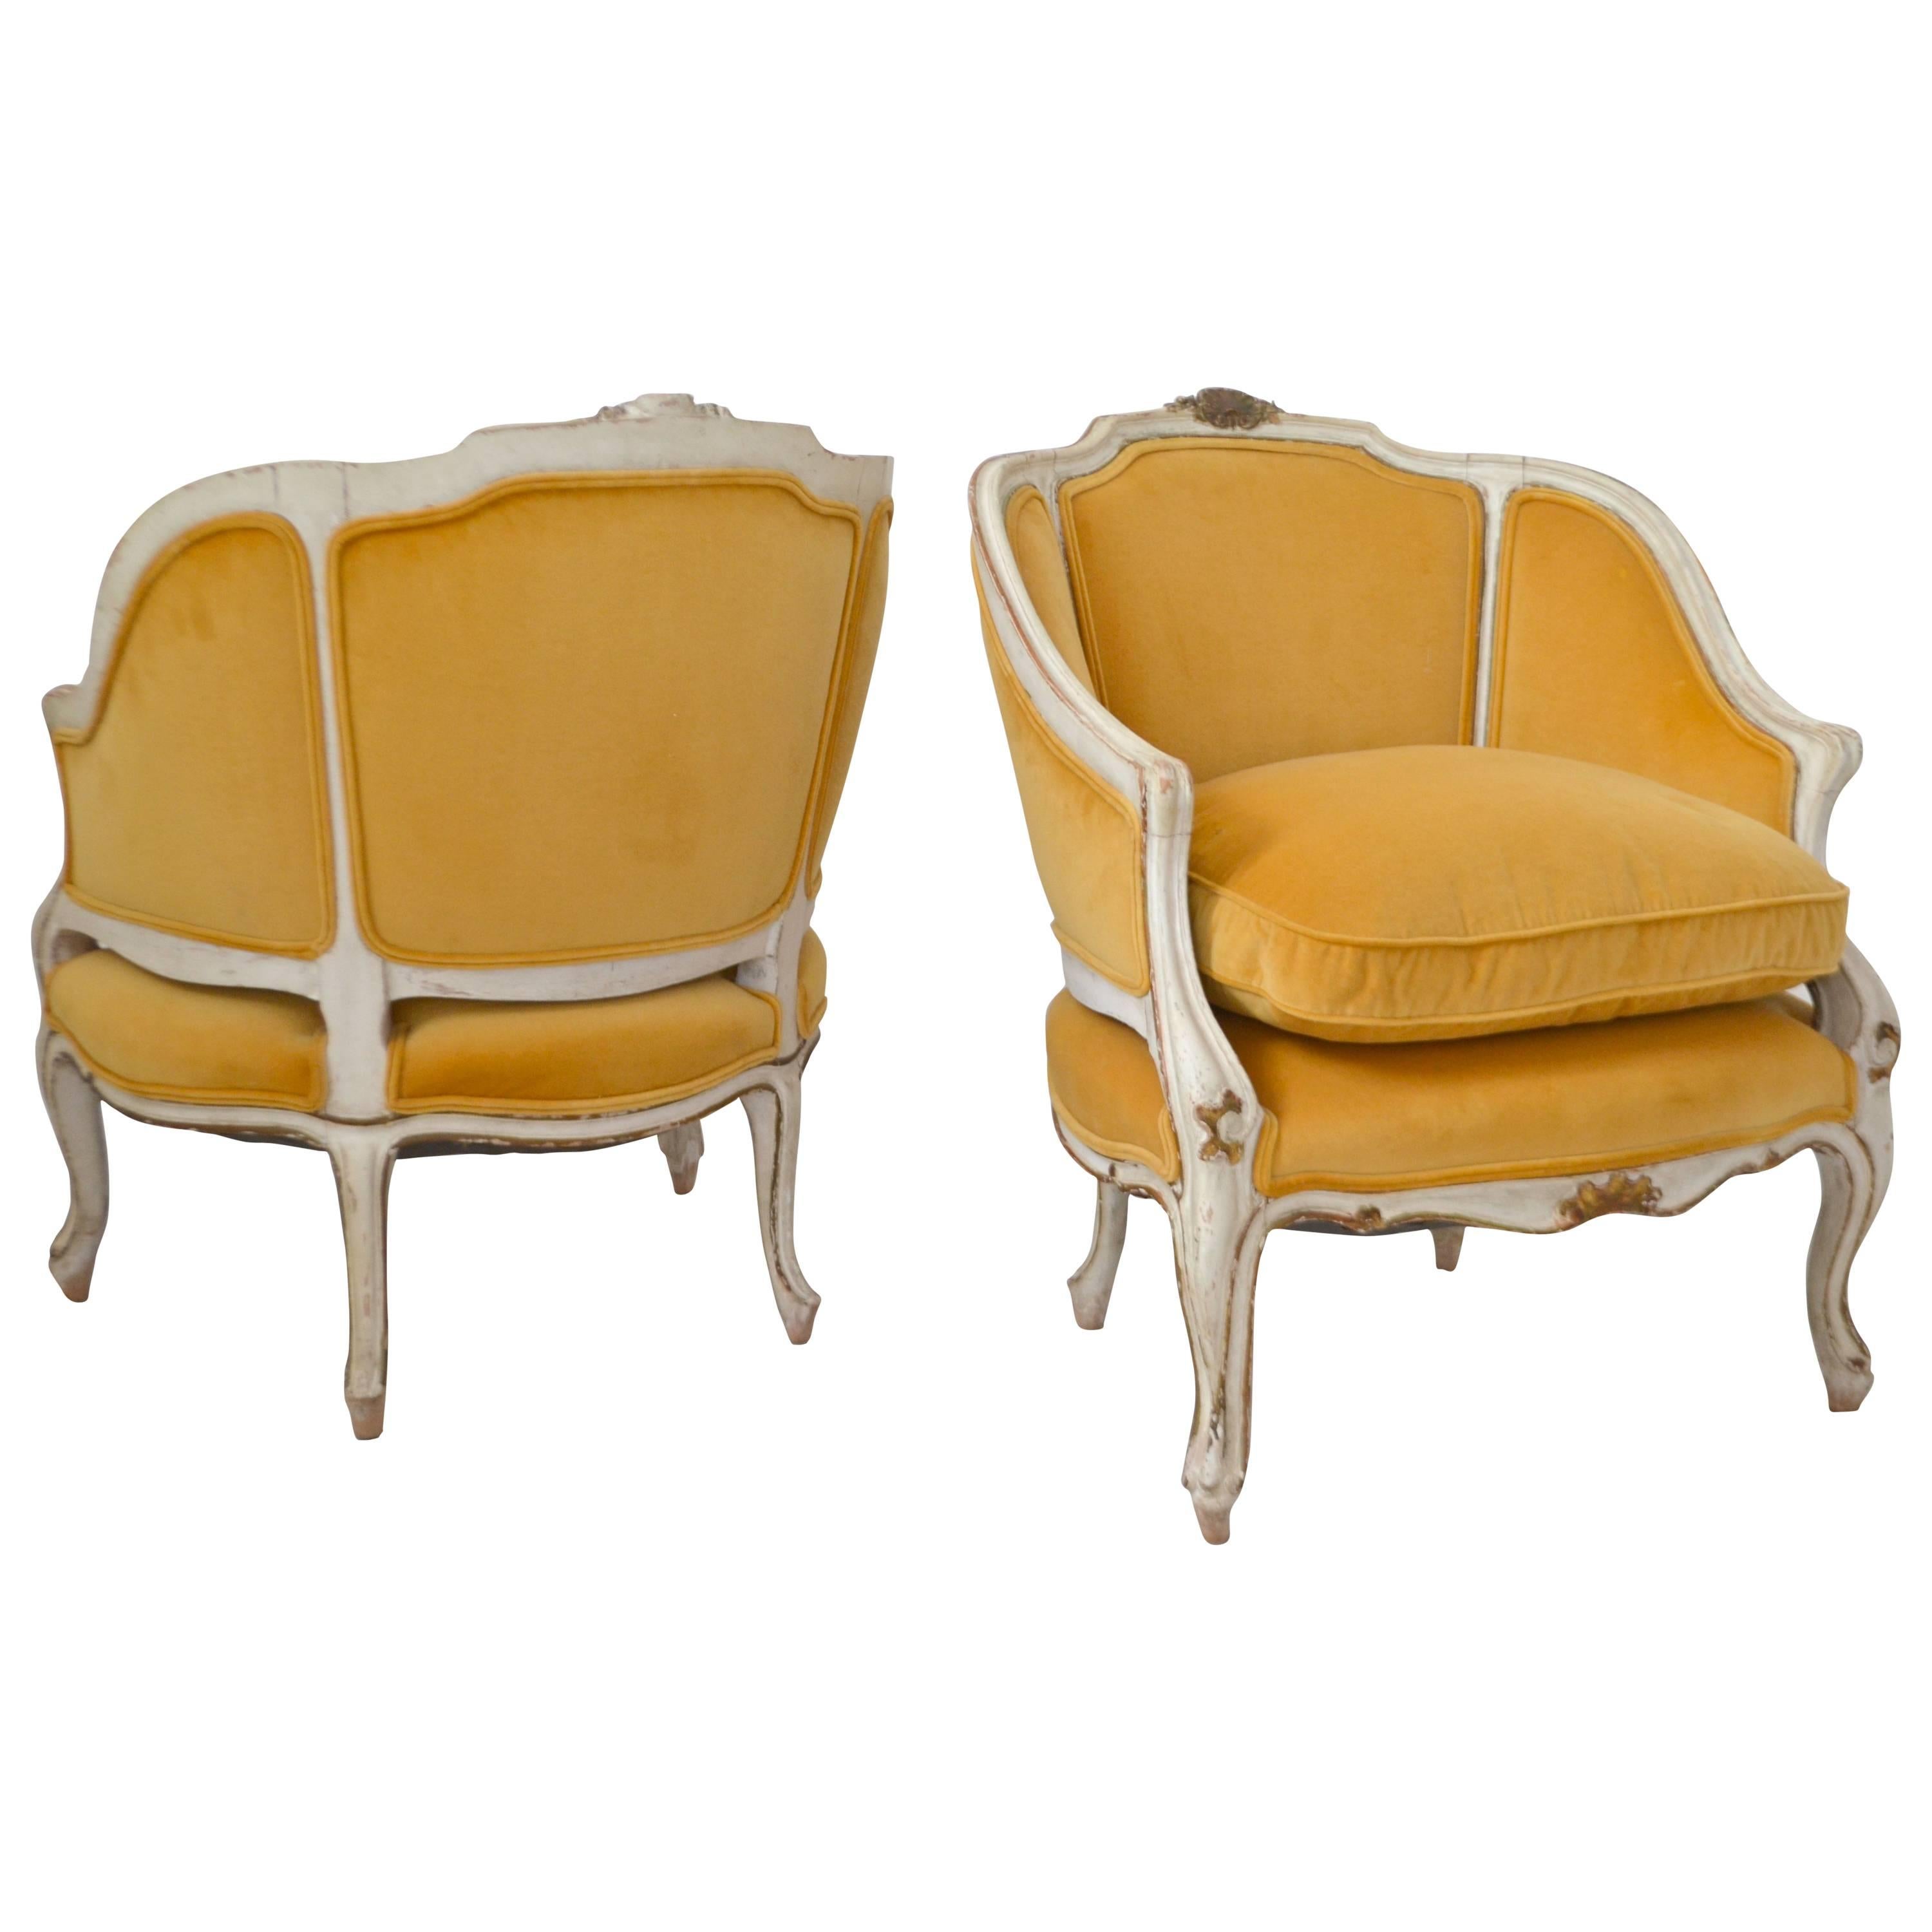 Pair of French Louis XV Style Bergere Chairs